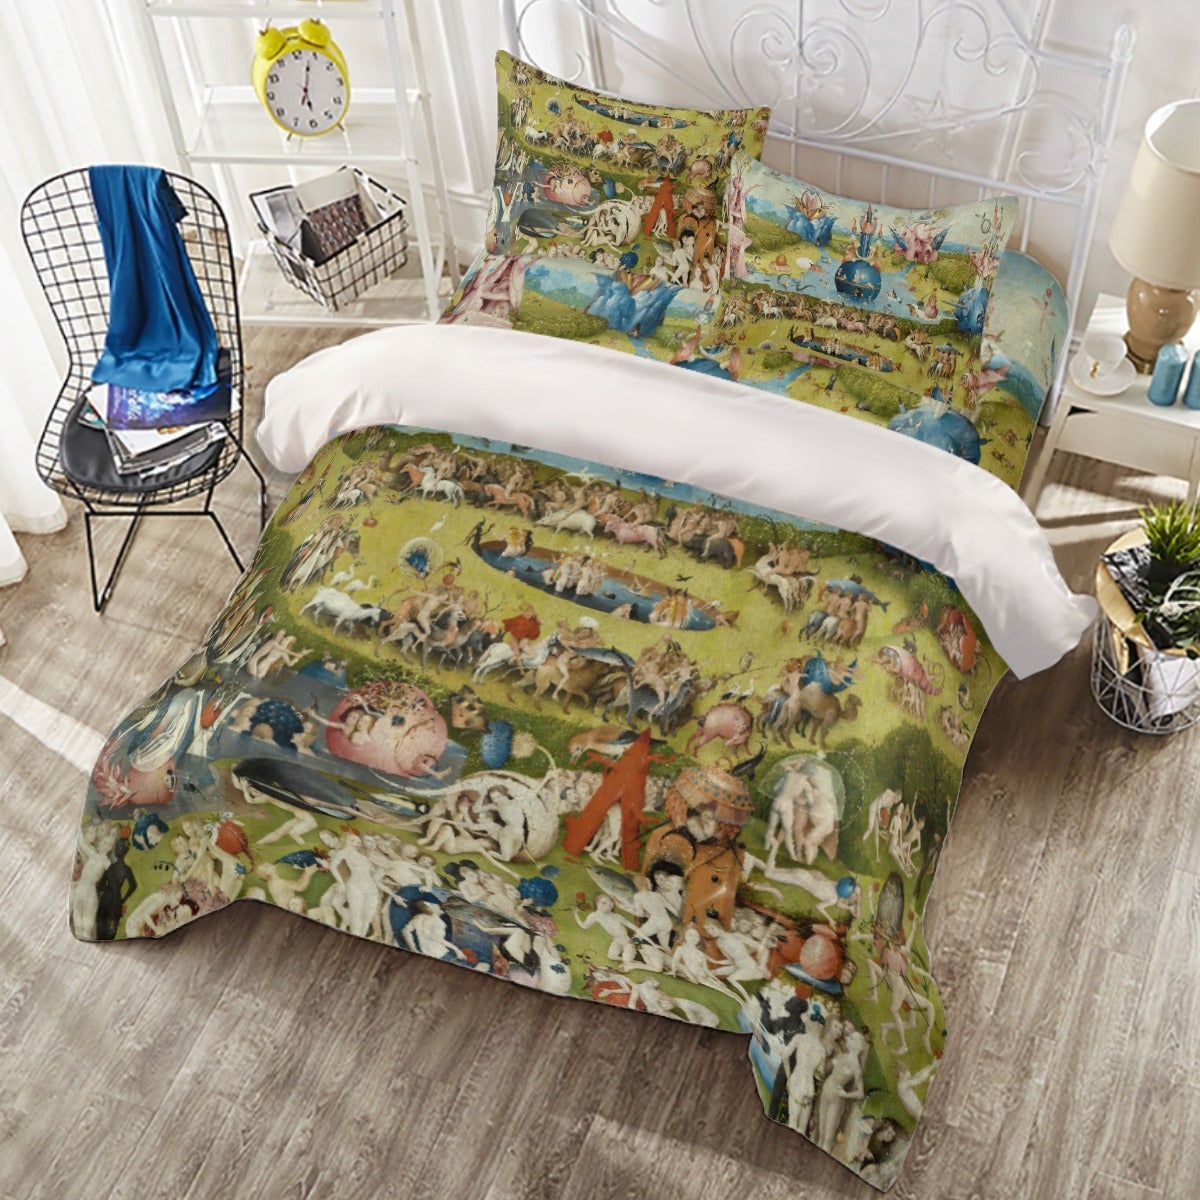 The Garden of Earthly Delights by Hieronymus Bosch 4-piece Duvet Set